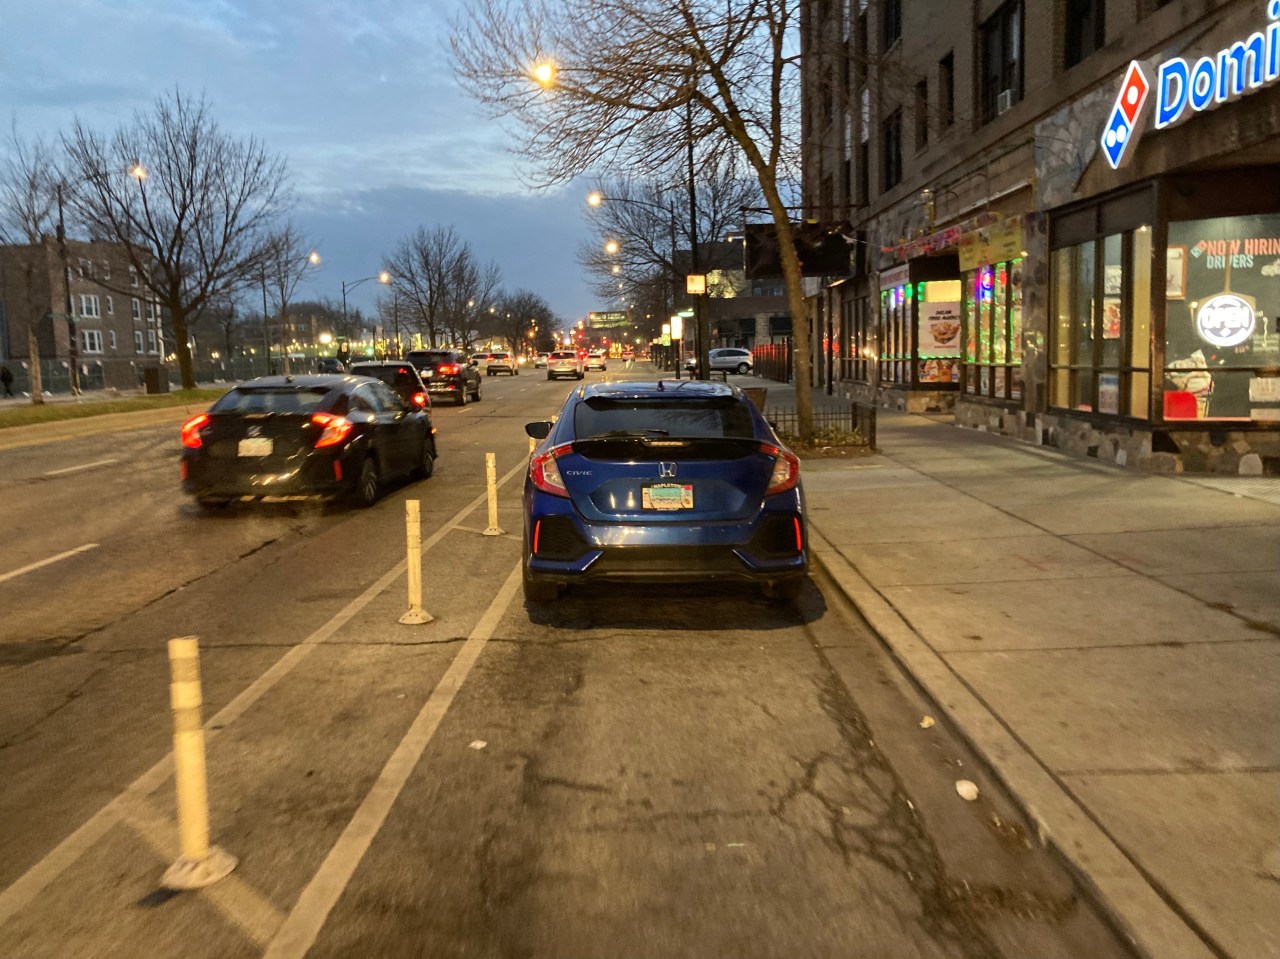 A car parked in a flexi-post delineated bike lane on Clark this evening. Photo: John Greenfield